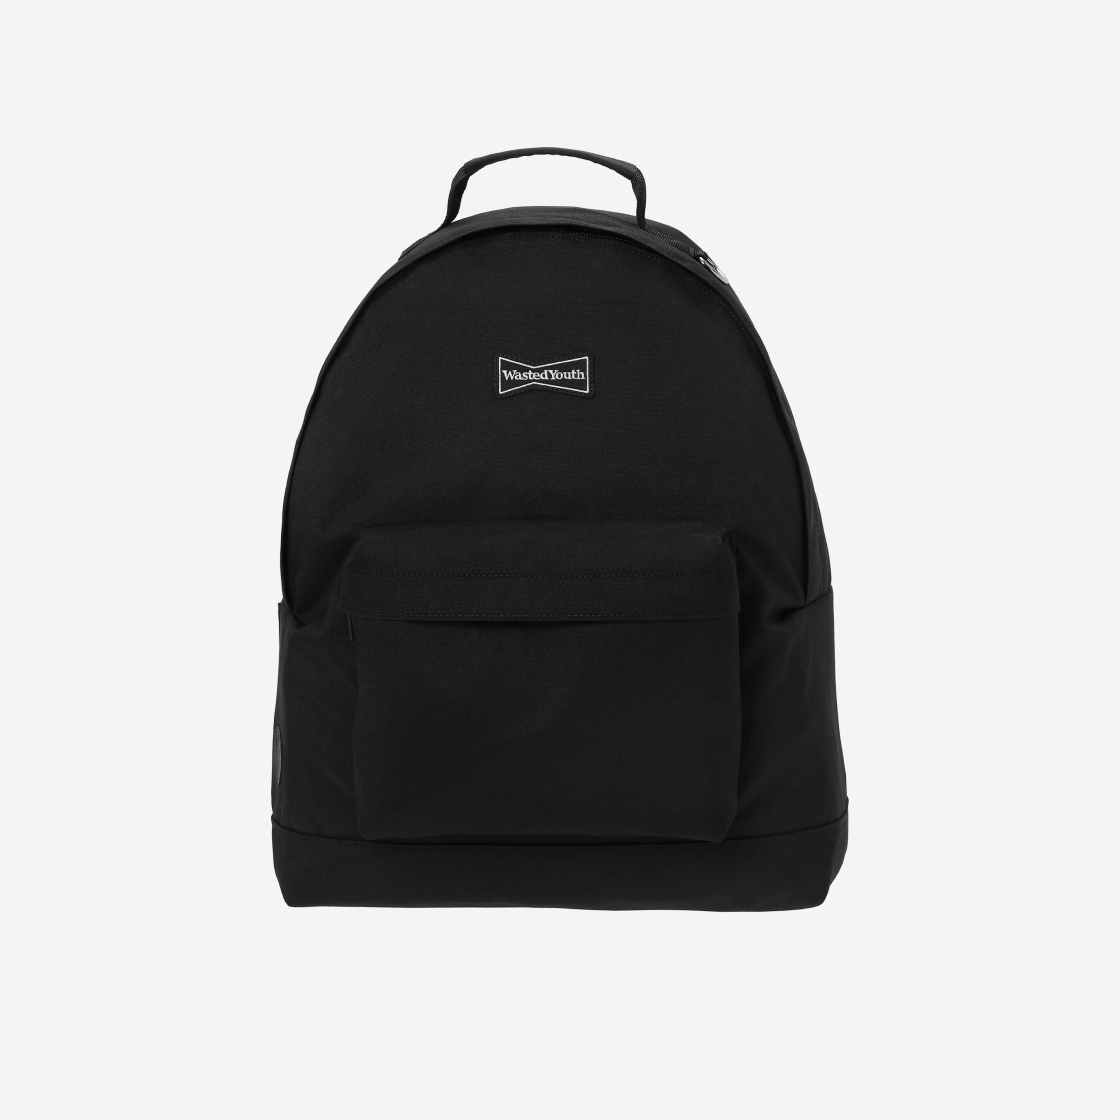 Wasted youth port day pack black